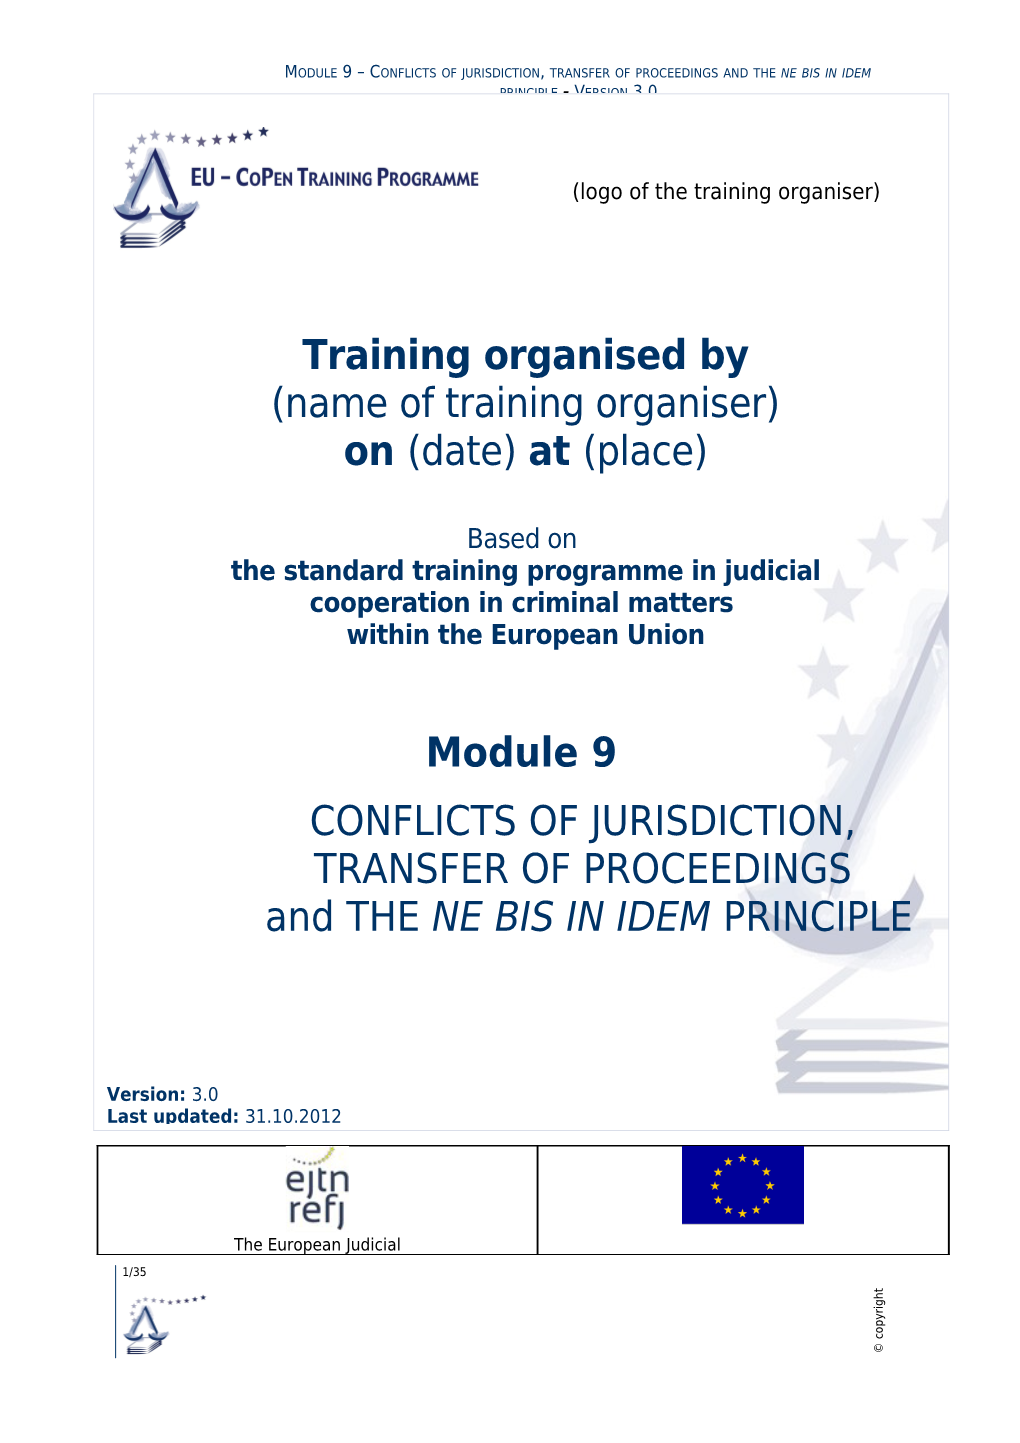 Module 9 Conflicts of Jurisdiction, Transfer of Proceedings and the Ne Bis in Idem Principle